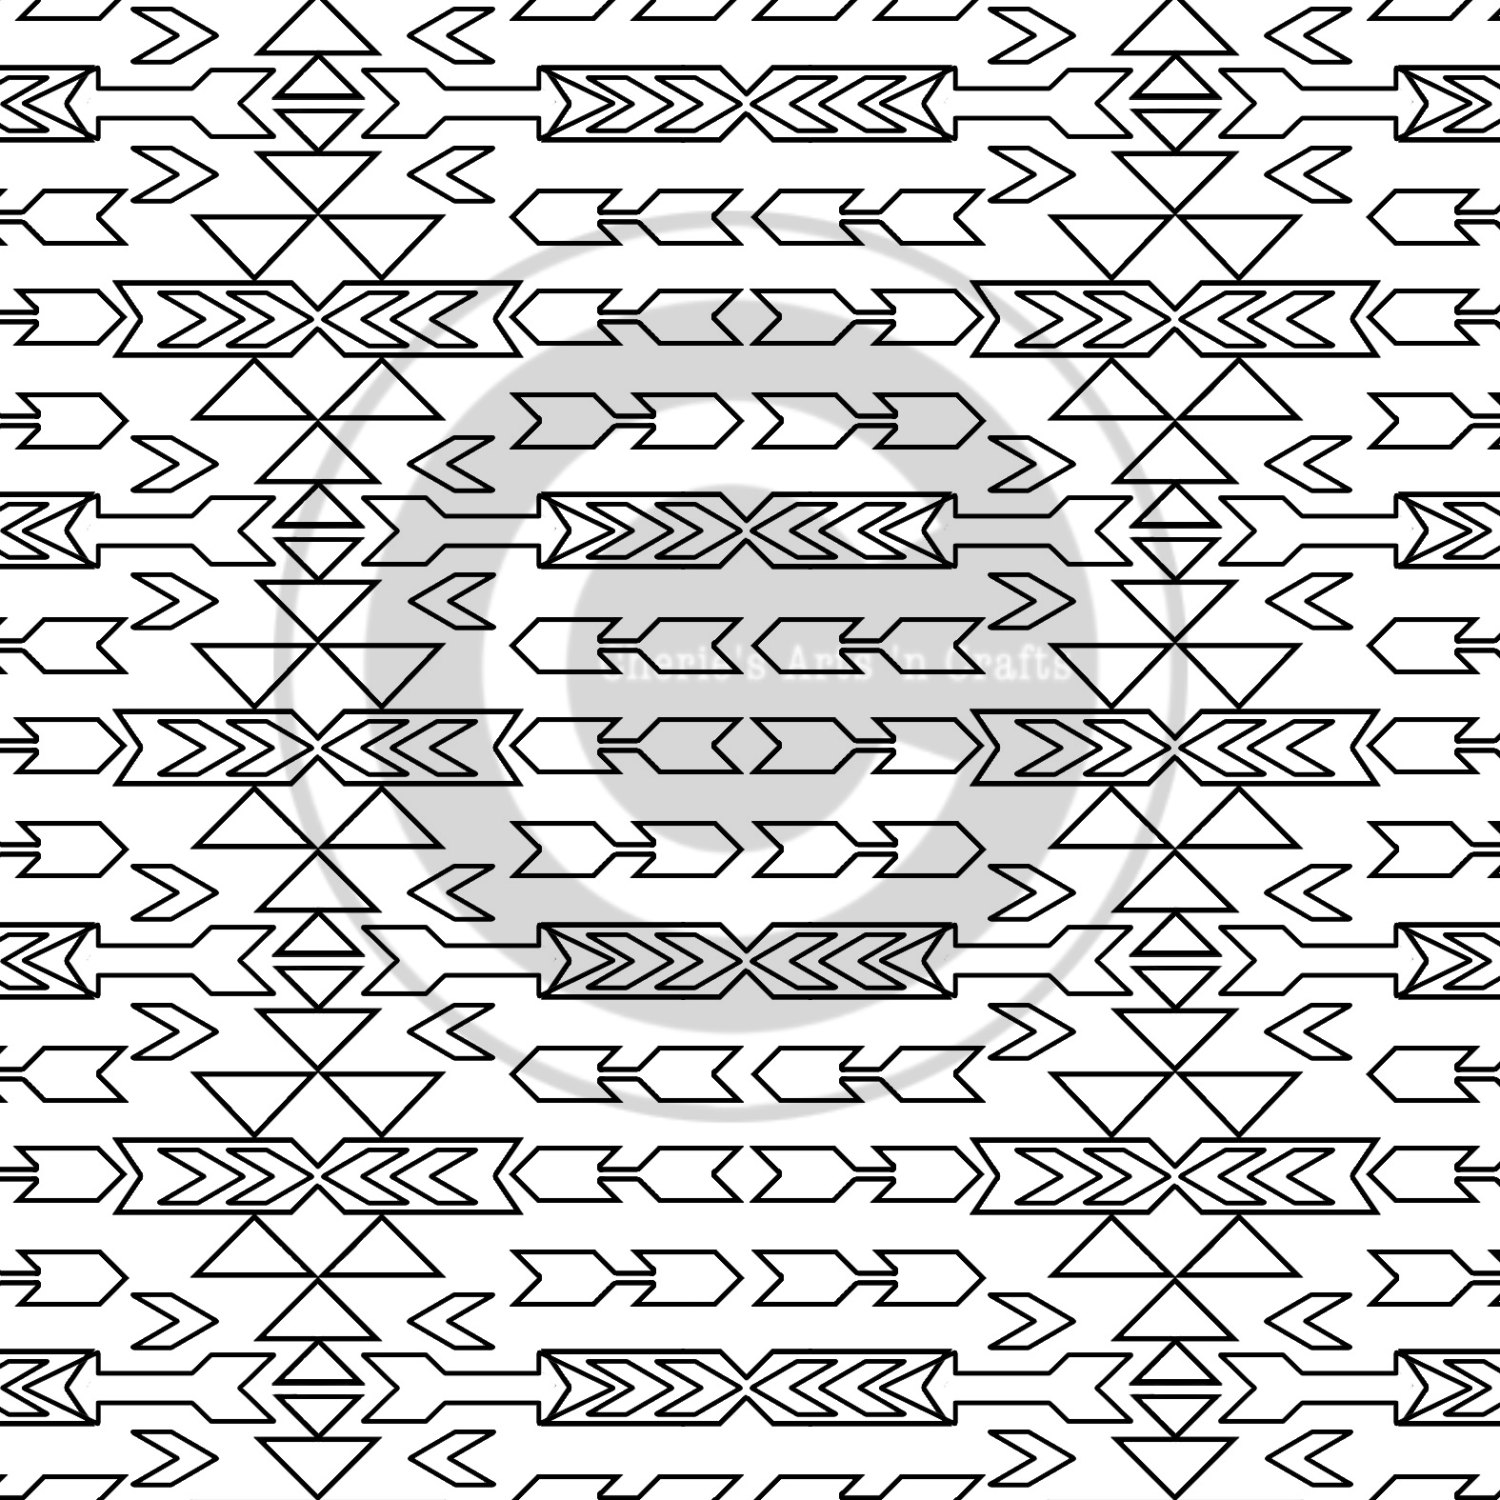 Aztec Patterns Coloring Pages Tribal Patterns Digital - Etsy